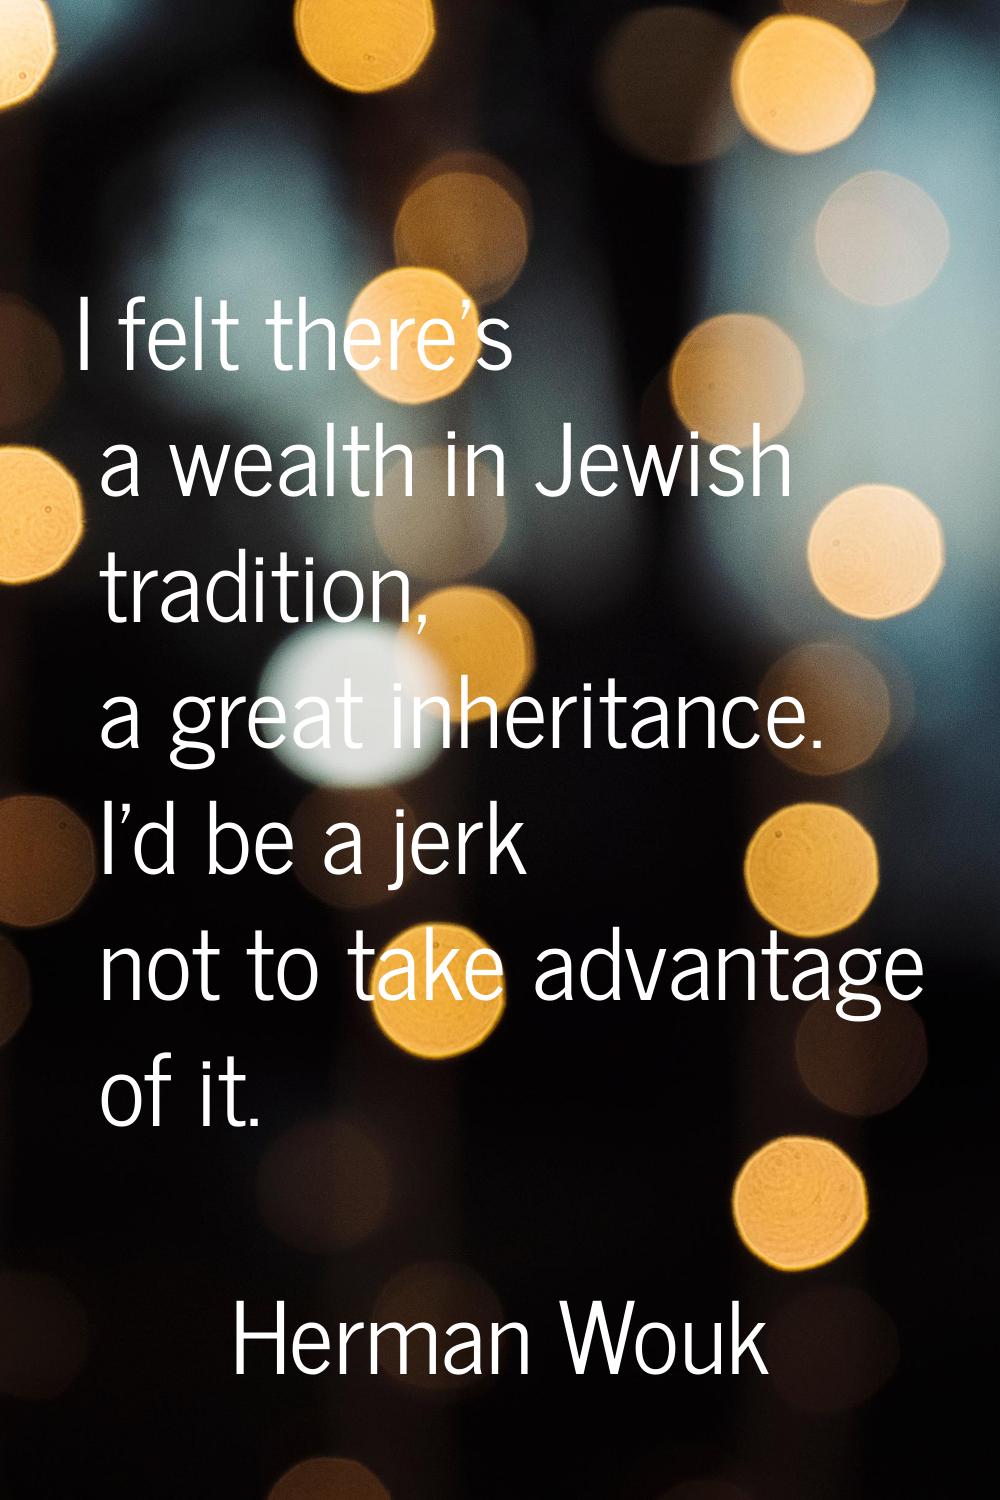 I felt there's a wealth in Jewish tradition, a great inheritance. I'd be a jerk not to take advanta